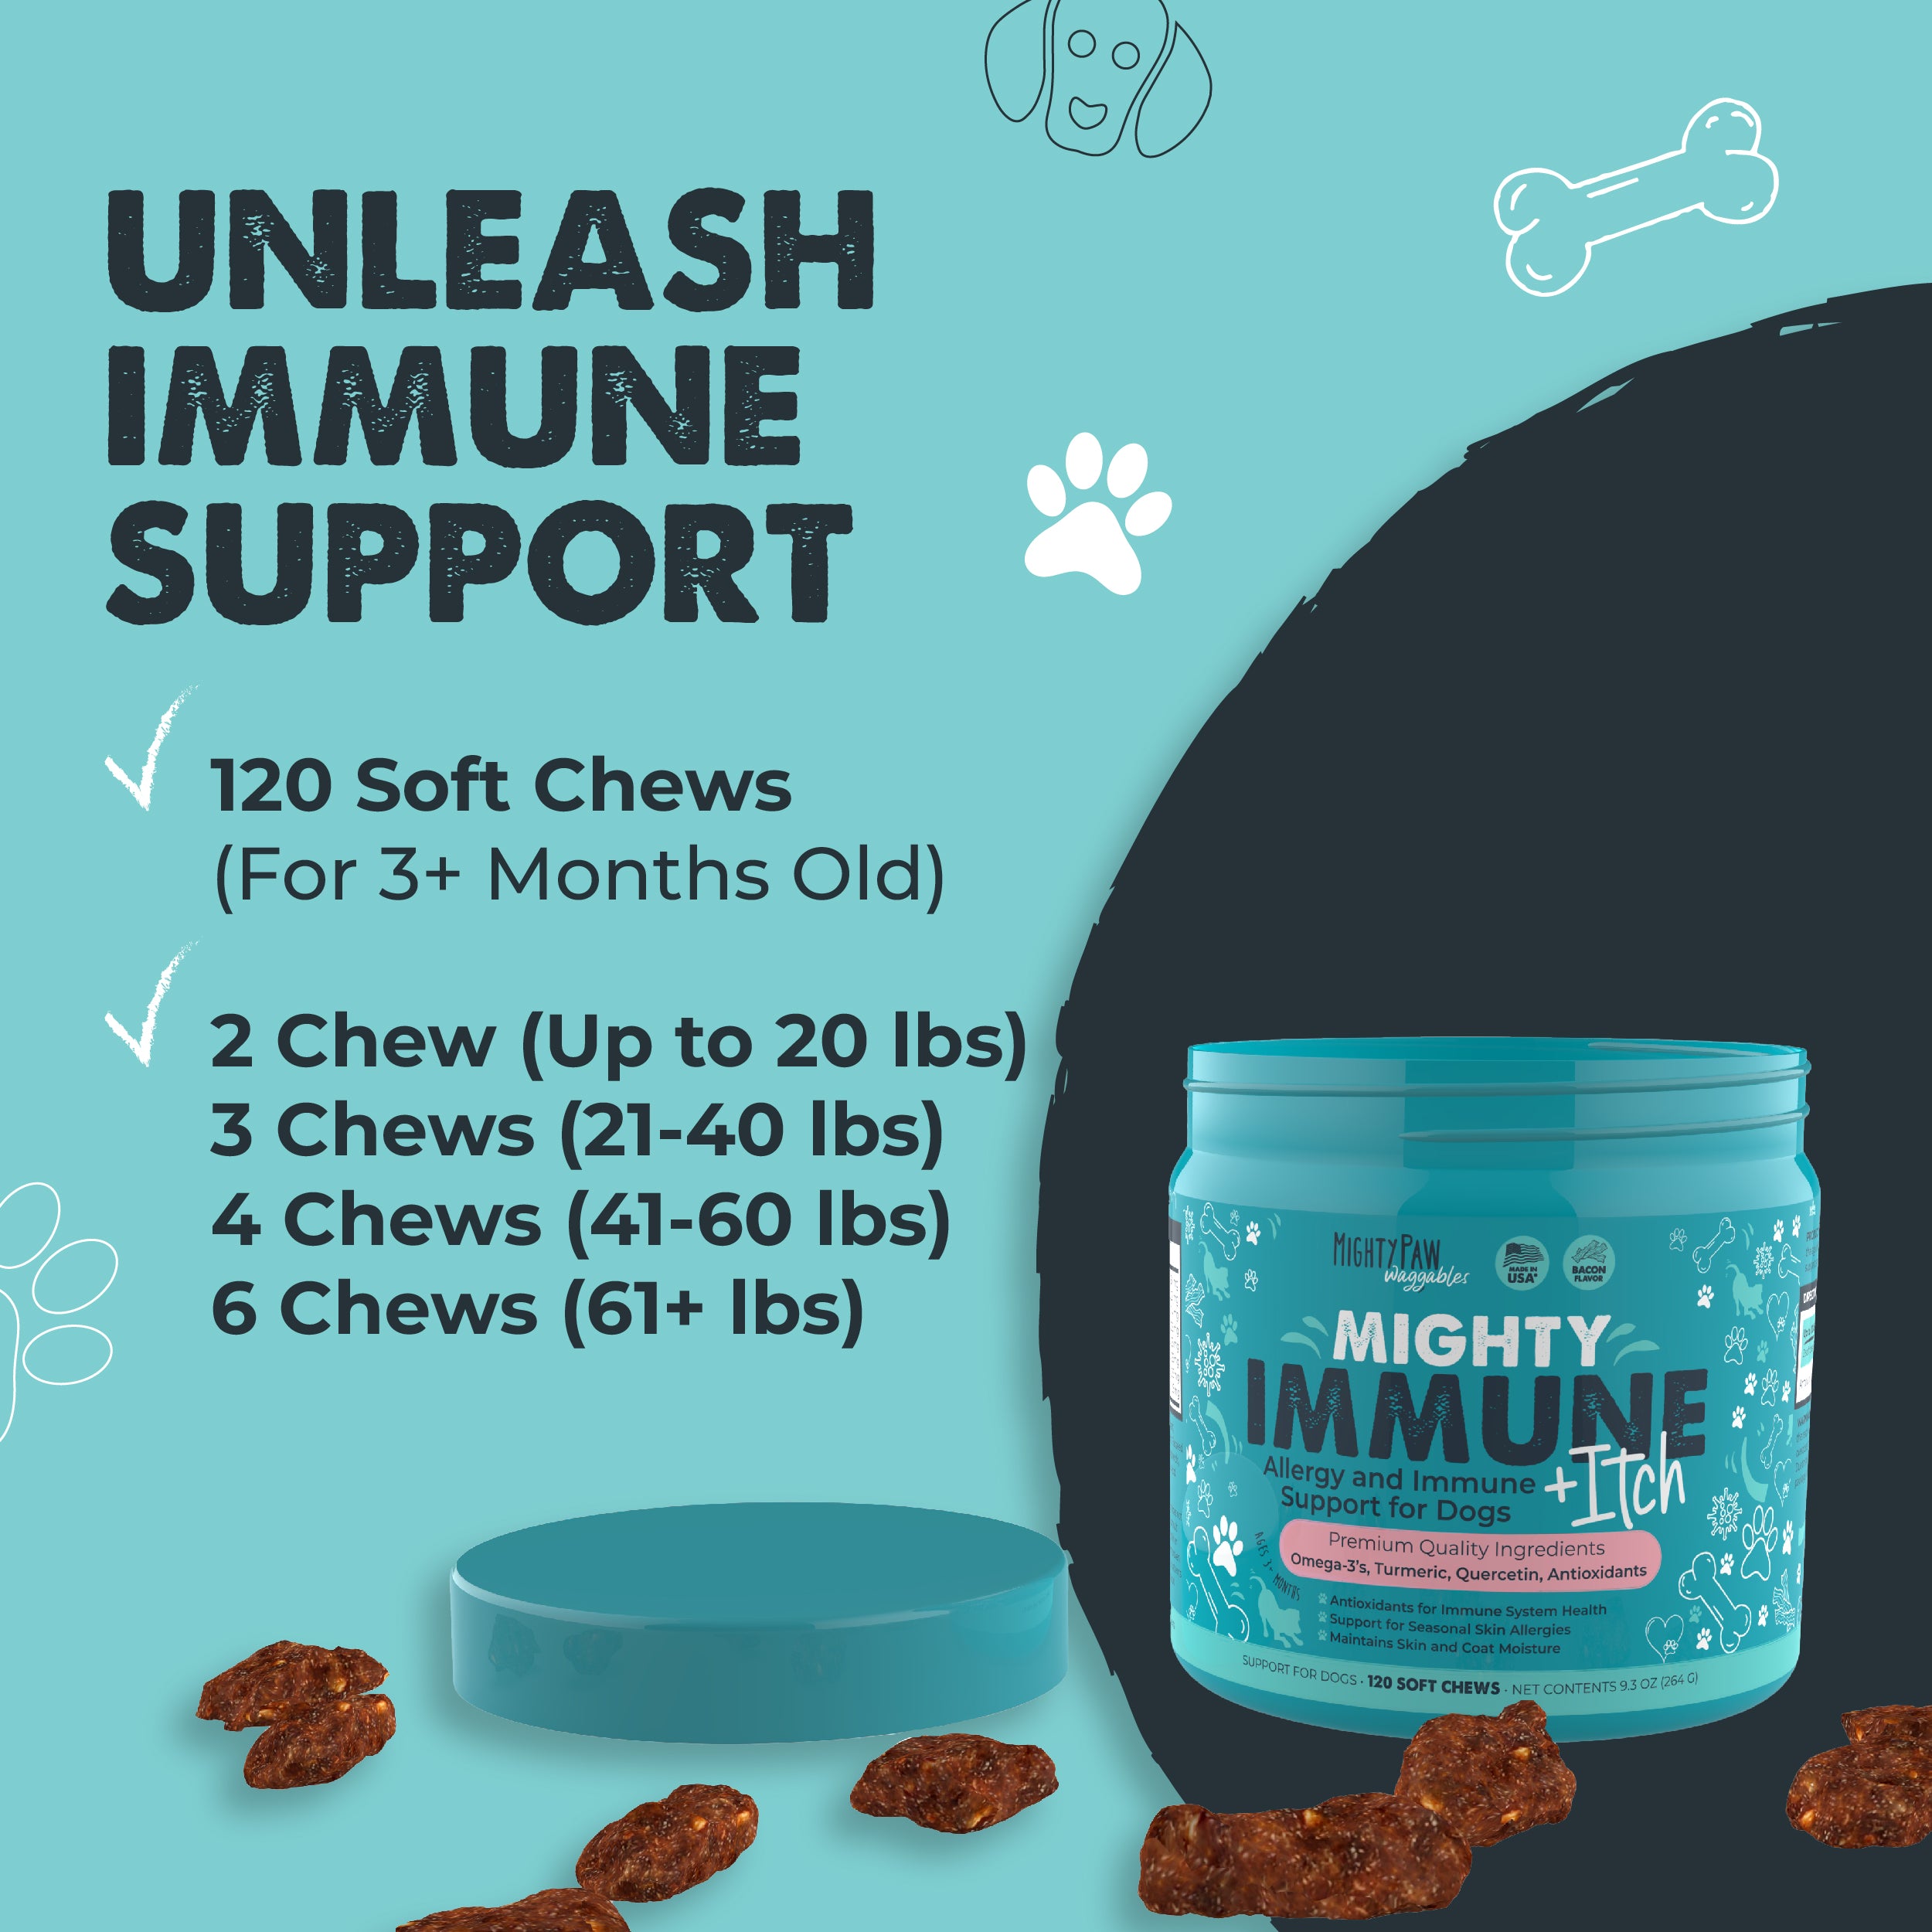 Mighty Immune + Itch Chews for Dogs | Allergy and Immune Support